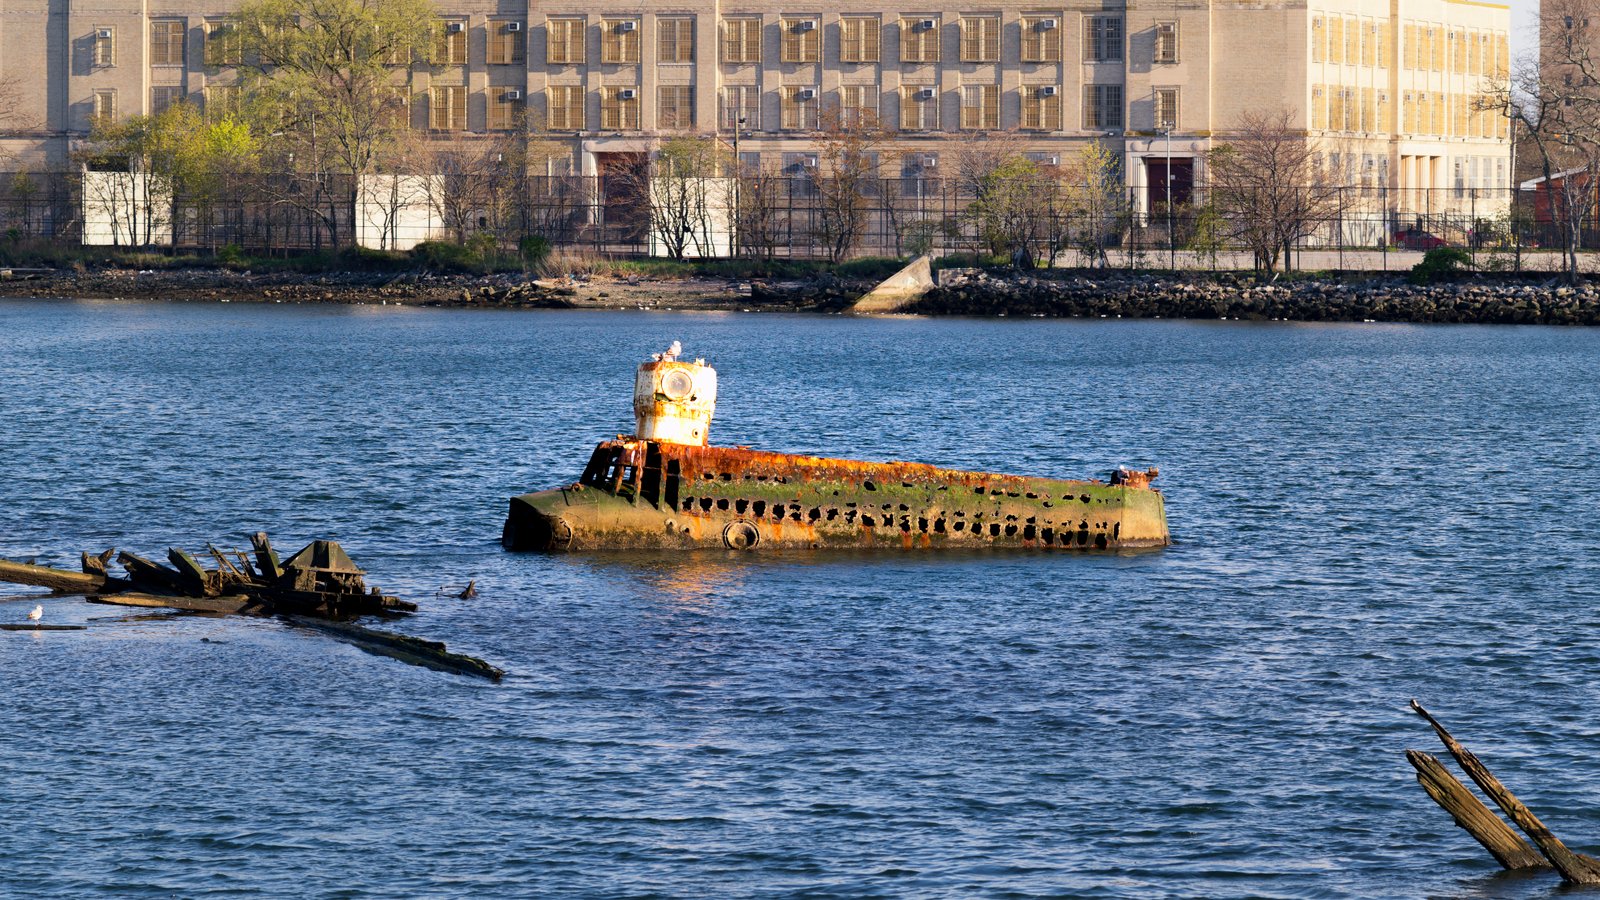 Quester I (Yellow Submarine) Wrecked in Coney Island Creek. Built in 1967 by Jerry Bianco.